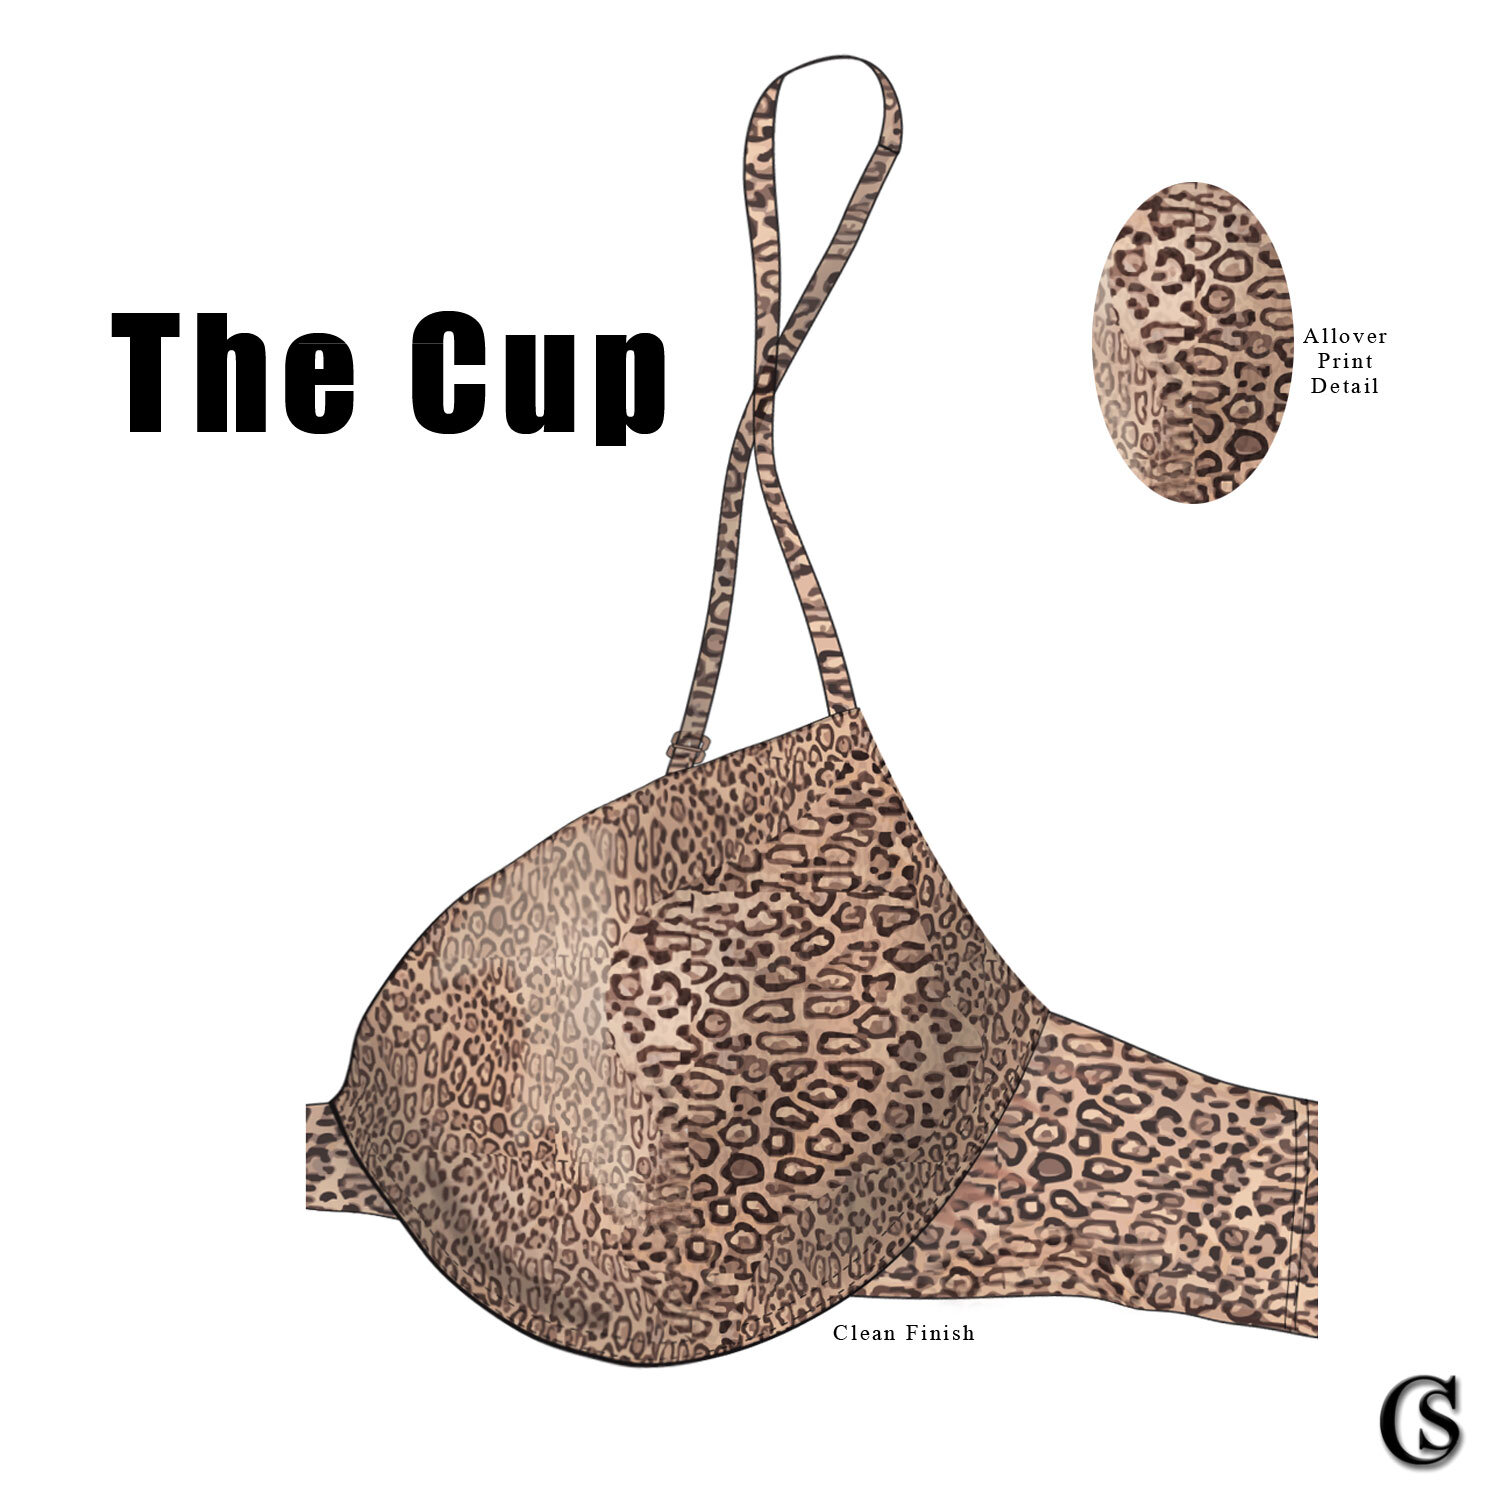 lingerie-cup-design-concepts-2021-all-over-print-cad-bra-board-chiaristyle.jpg